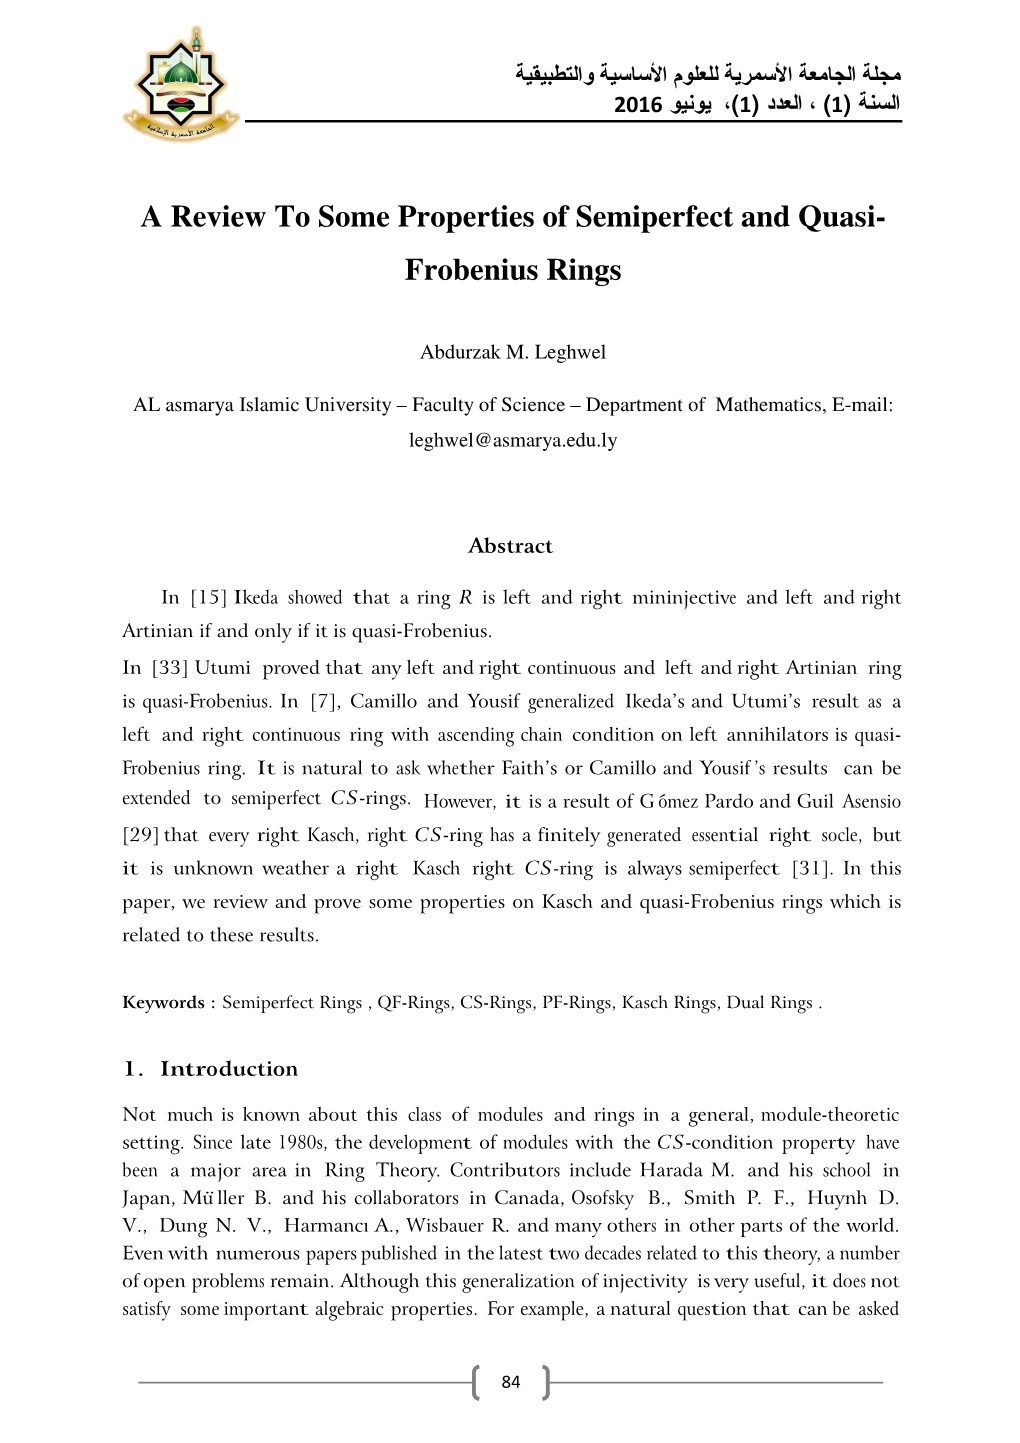 A Review to Some Properties of Semiperfect and Quasi- Frobenius Rings